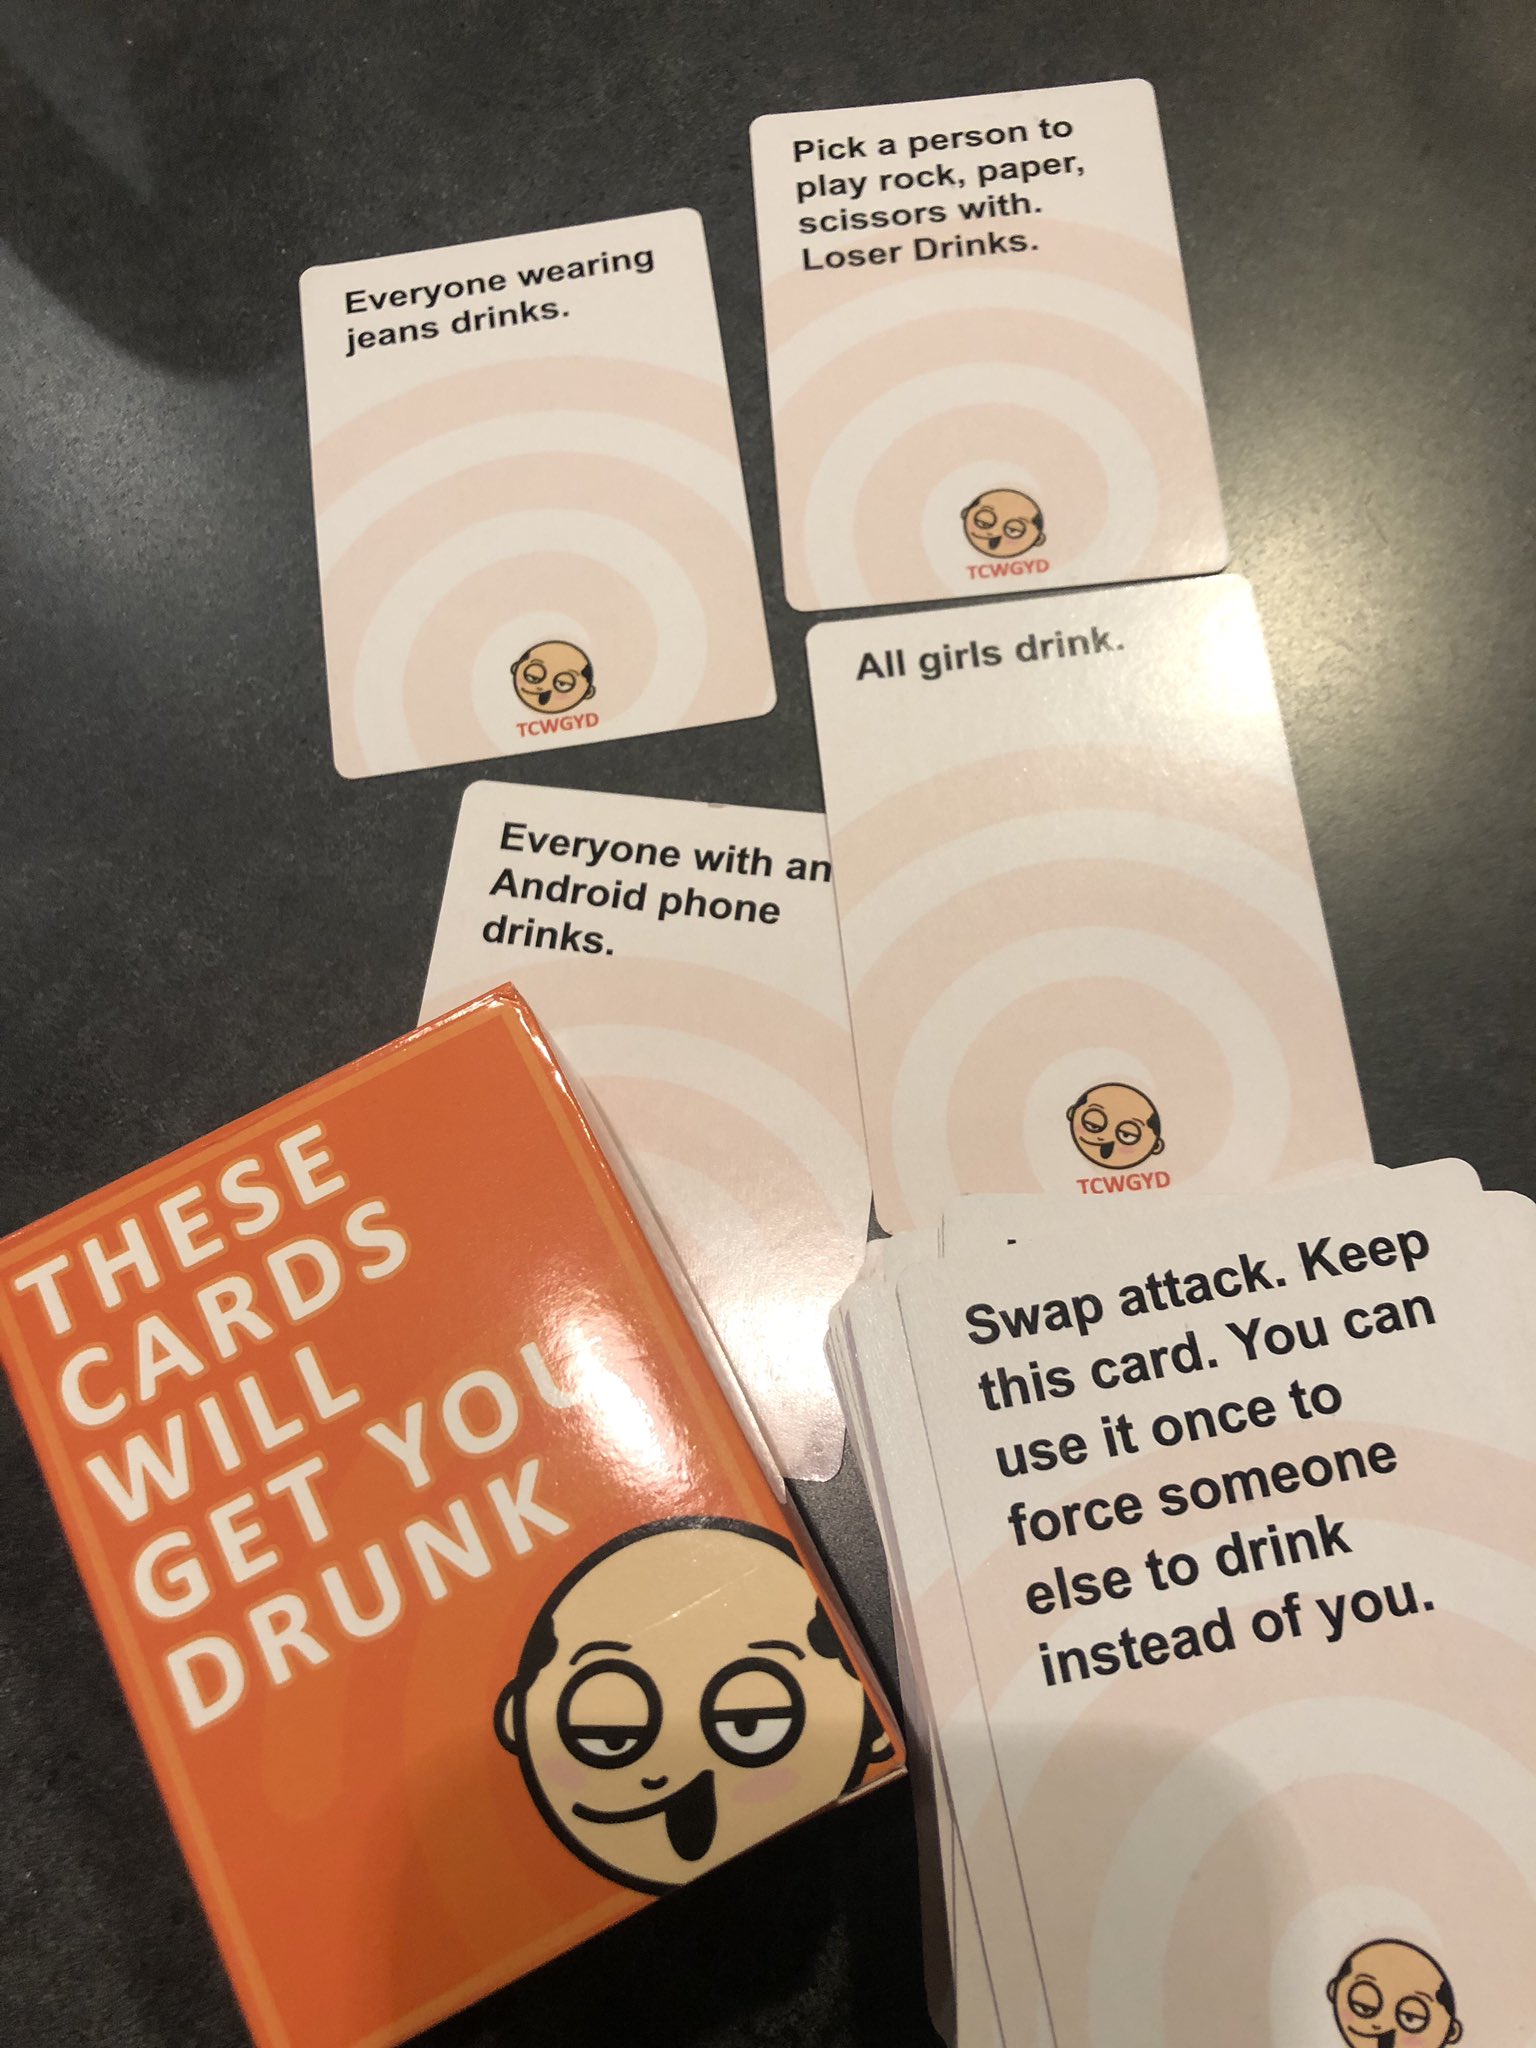 There Cards Will get you Drunk 